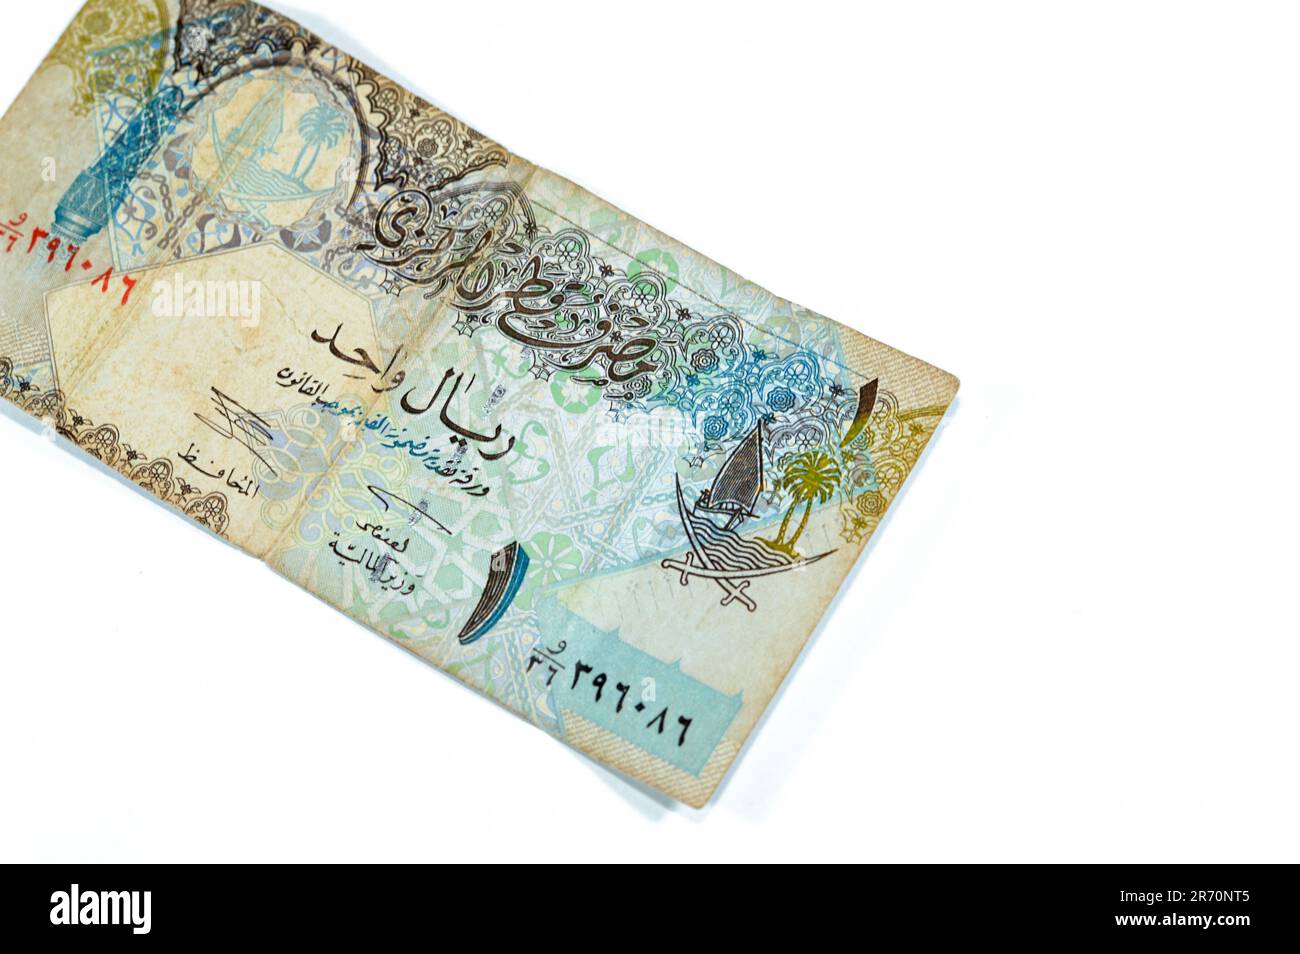 obverse side of 1 Qatari Riyal cash money currency of Qatar banknote features Ornated column, arches, sailboats, palm trees, crossed swords, vintage r Stock Photo